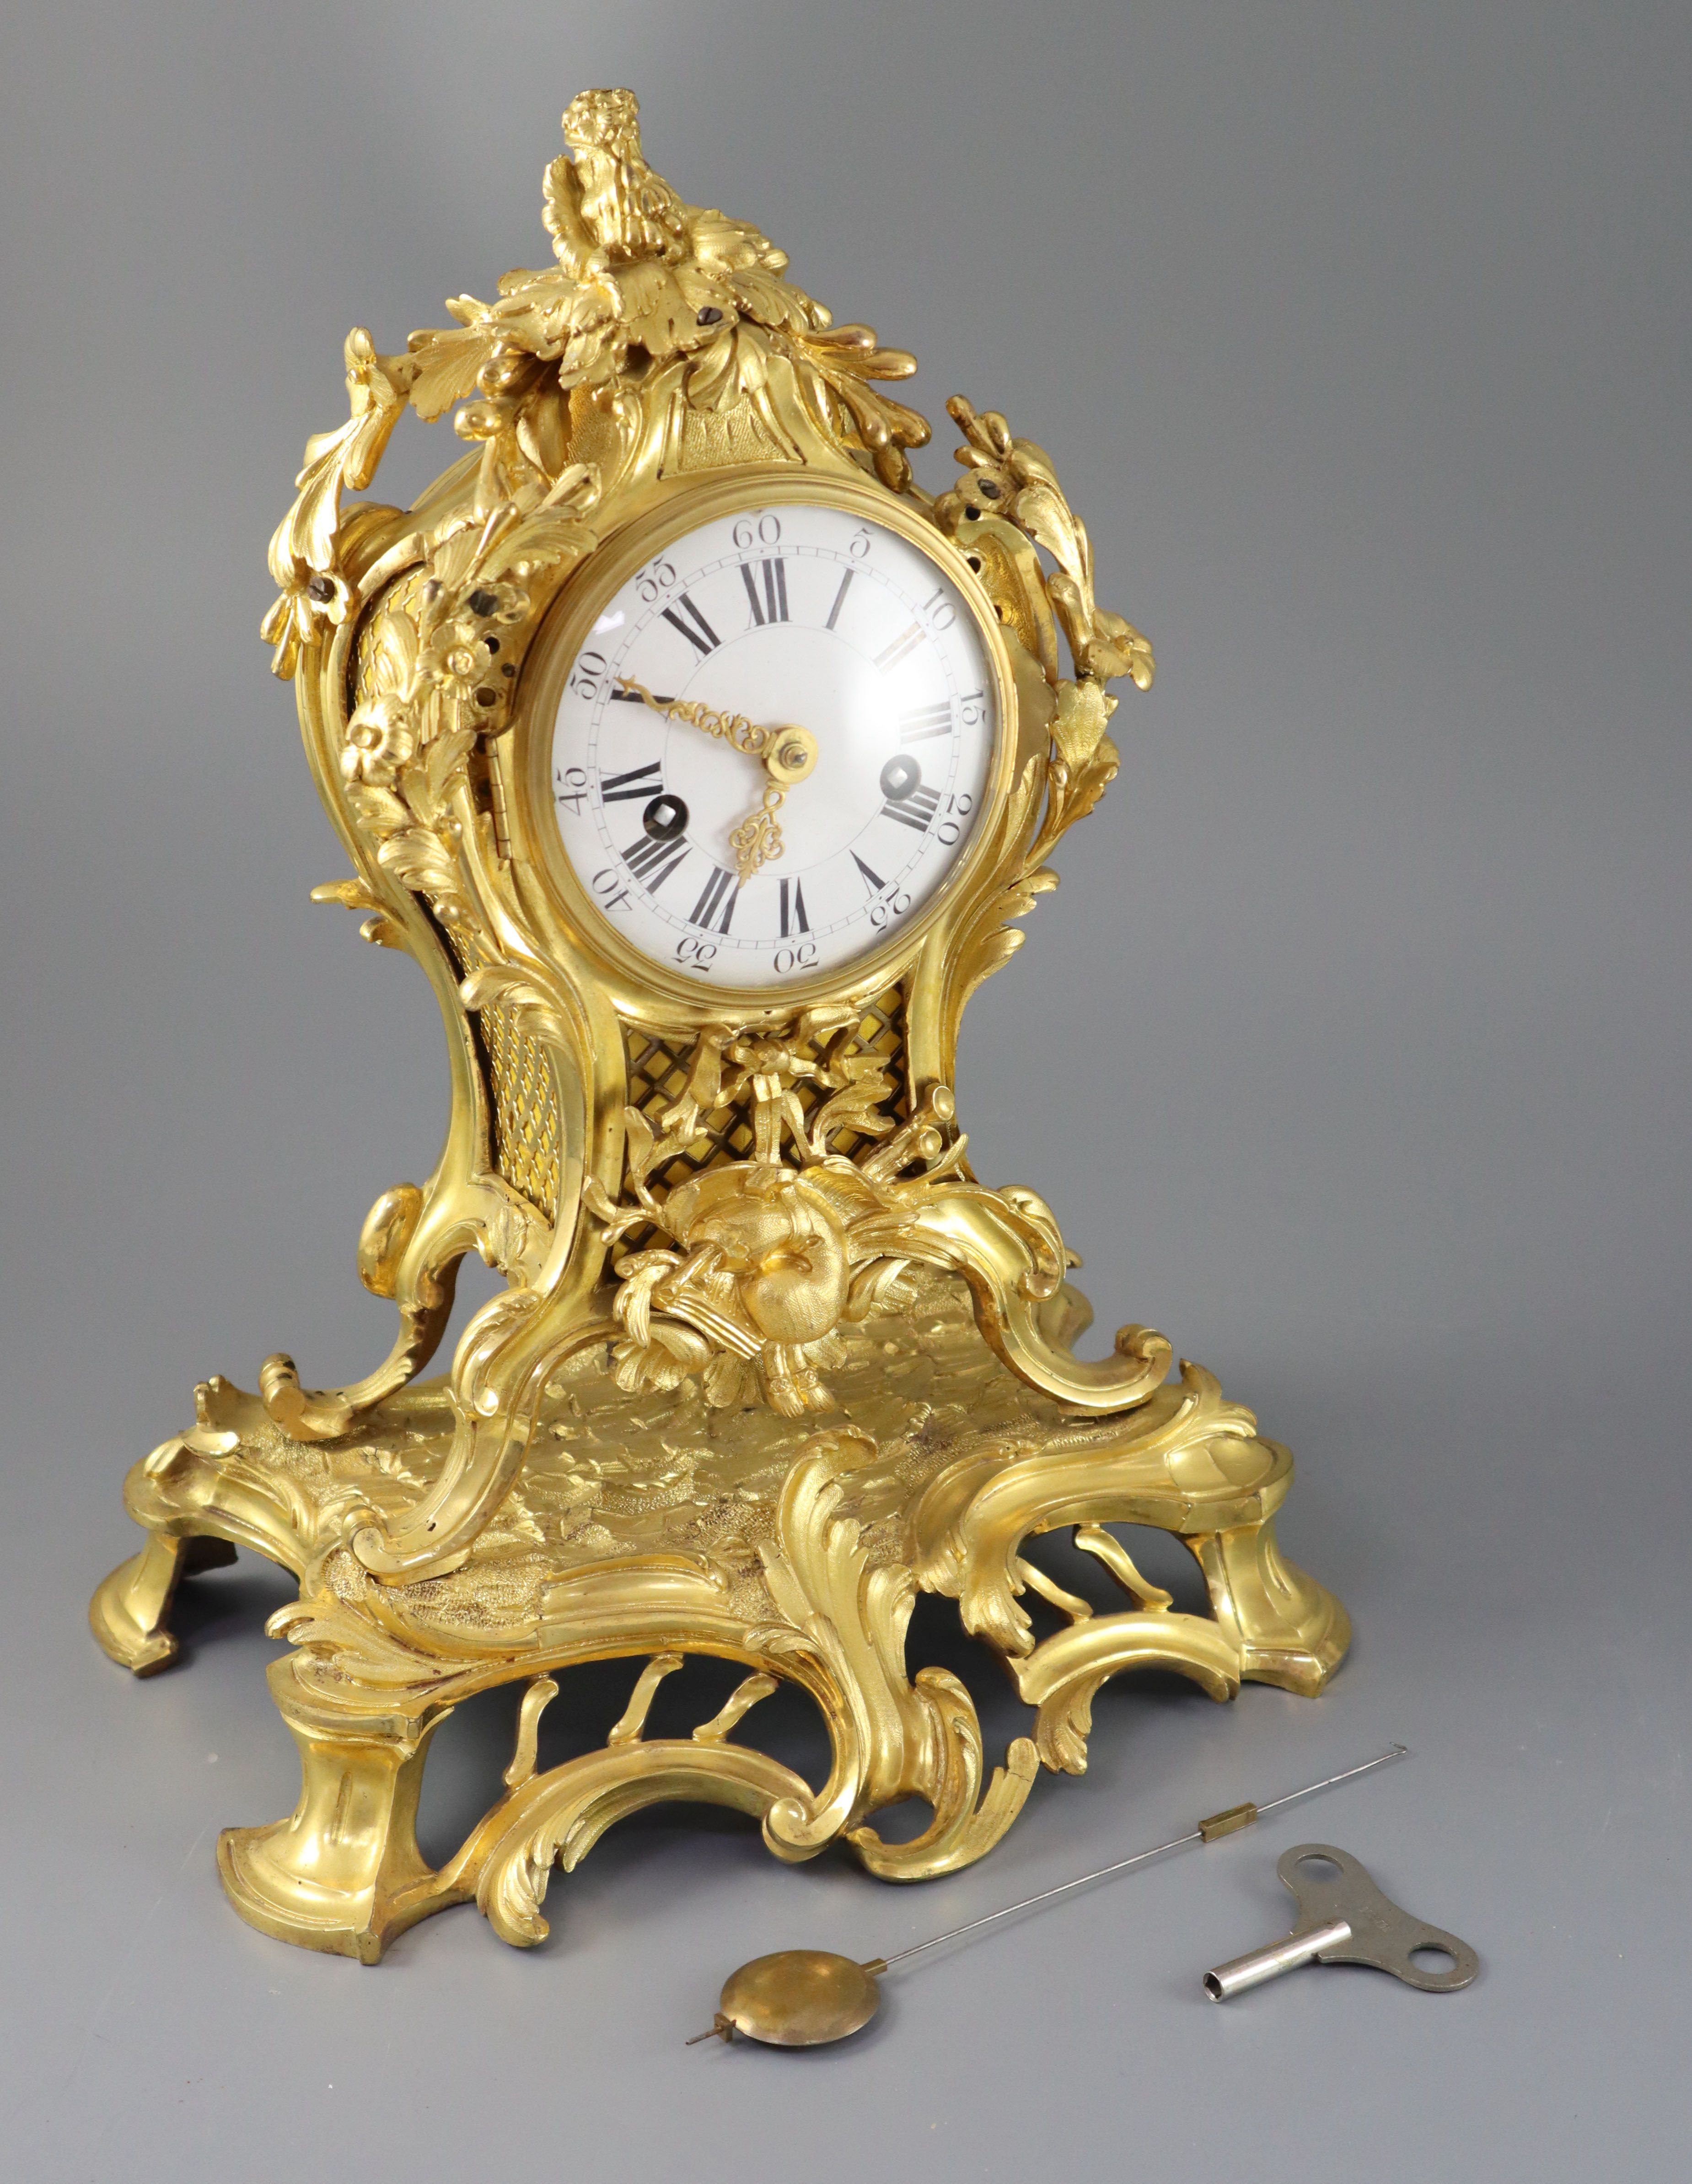 A mid 18th century French ormolu mantel clock, height 15in.